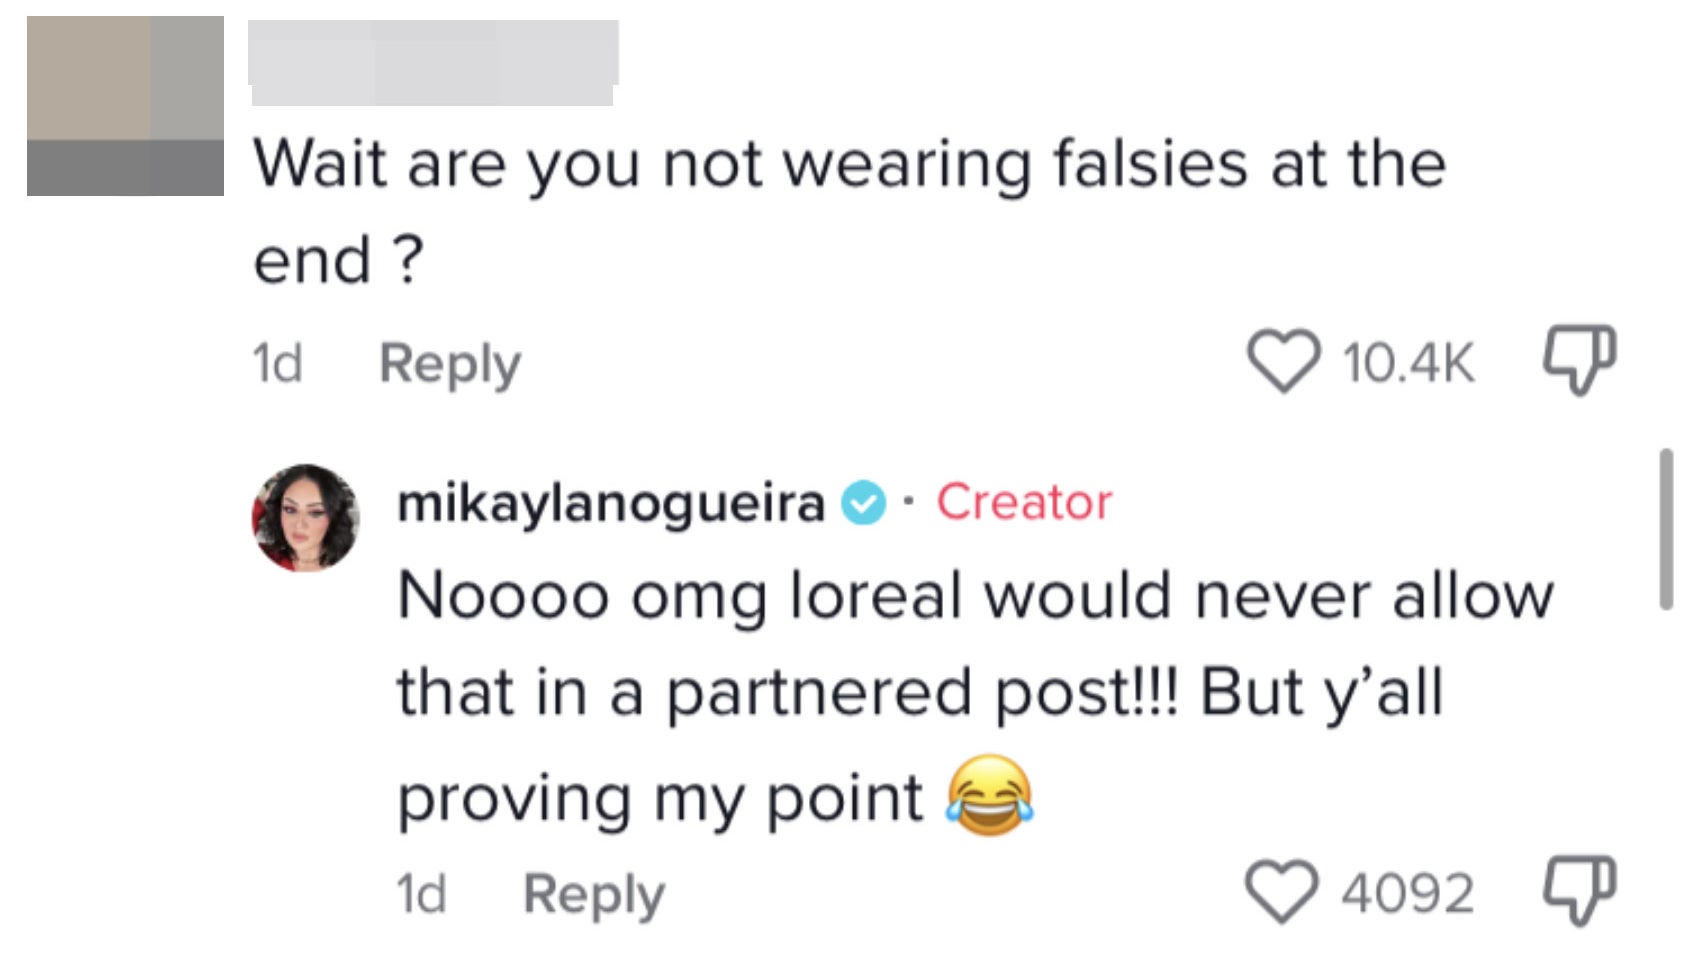 Mikayla says L&#x27;Oreal would never all that in a partnered post&quot;